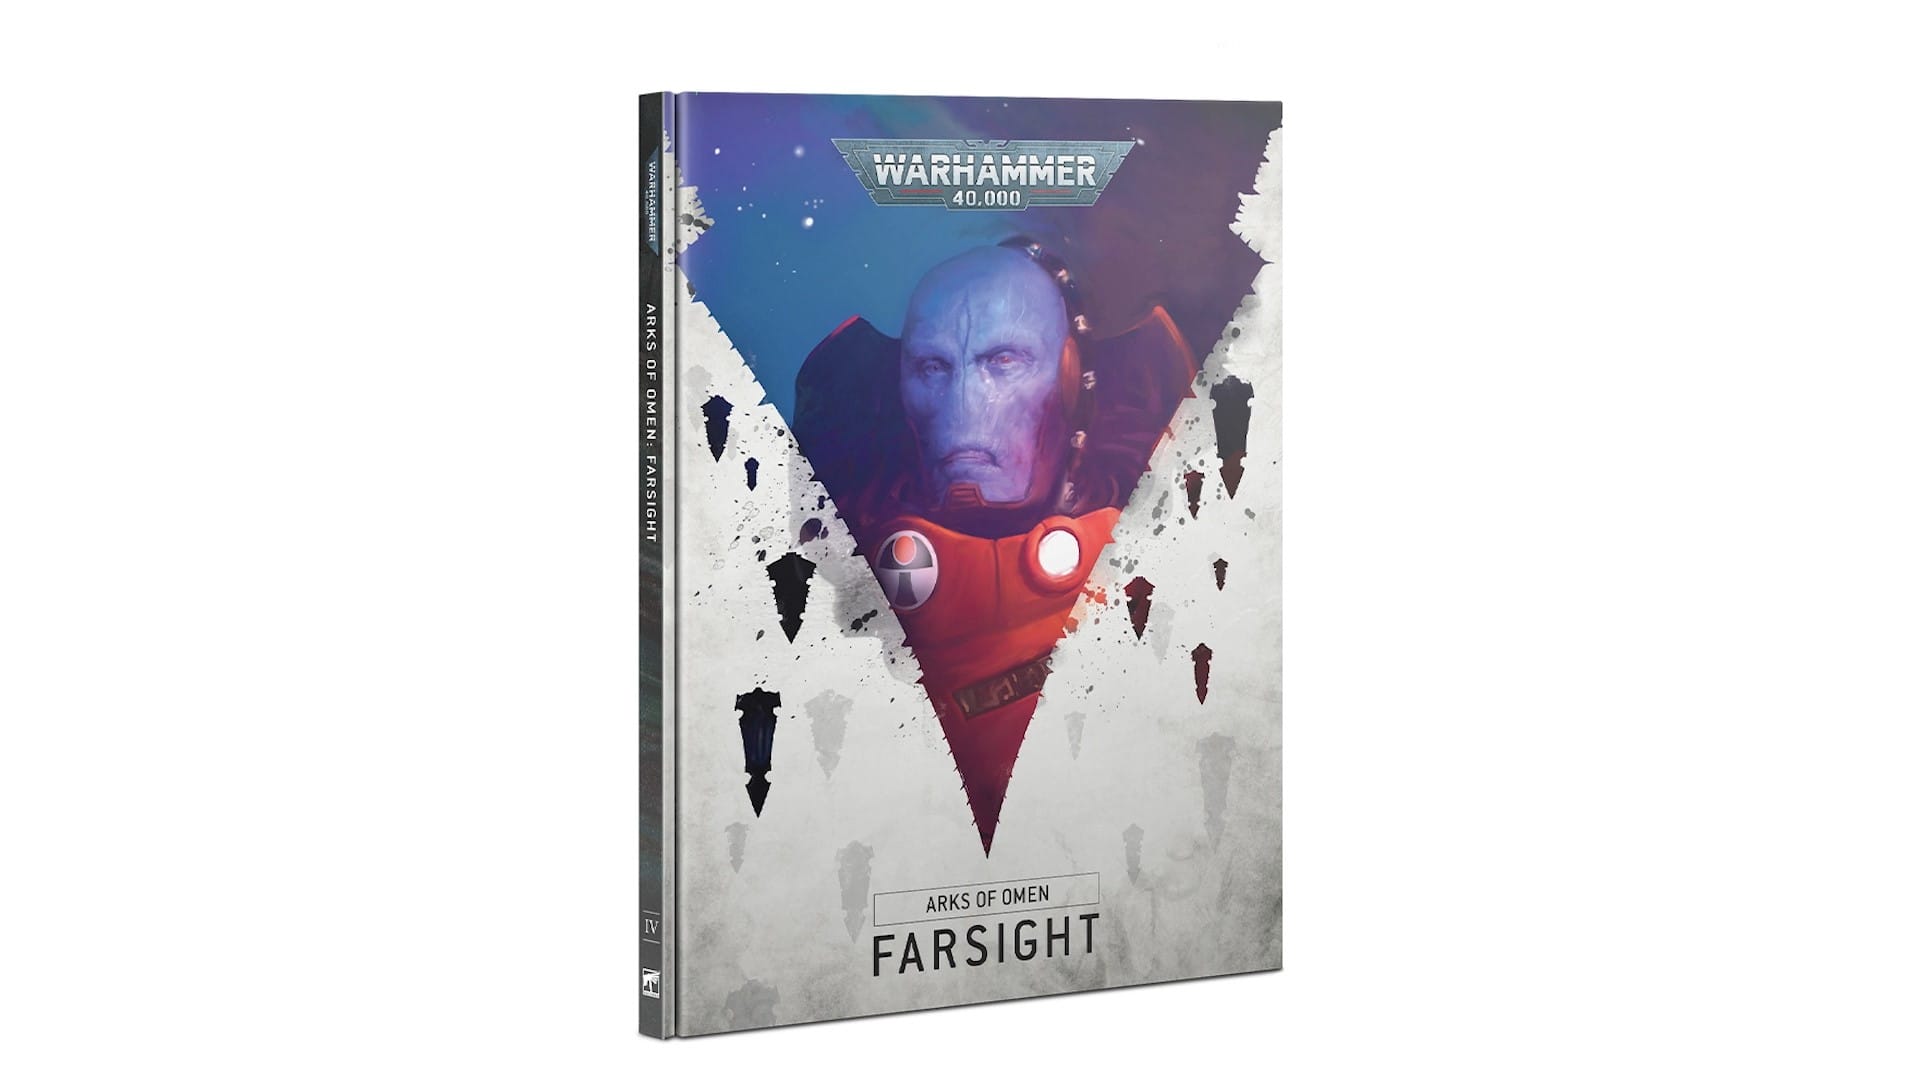 The book cover of Arks of Omen: Farsight, featuring the face of Commander Farsight on the front